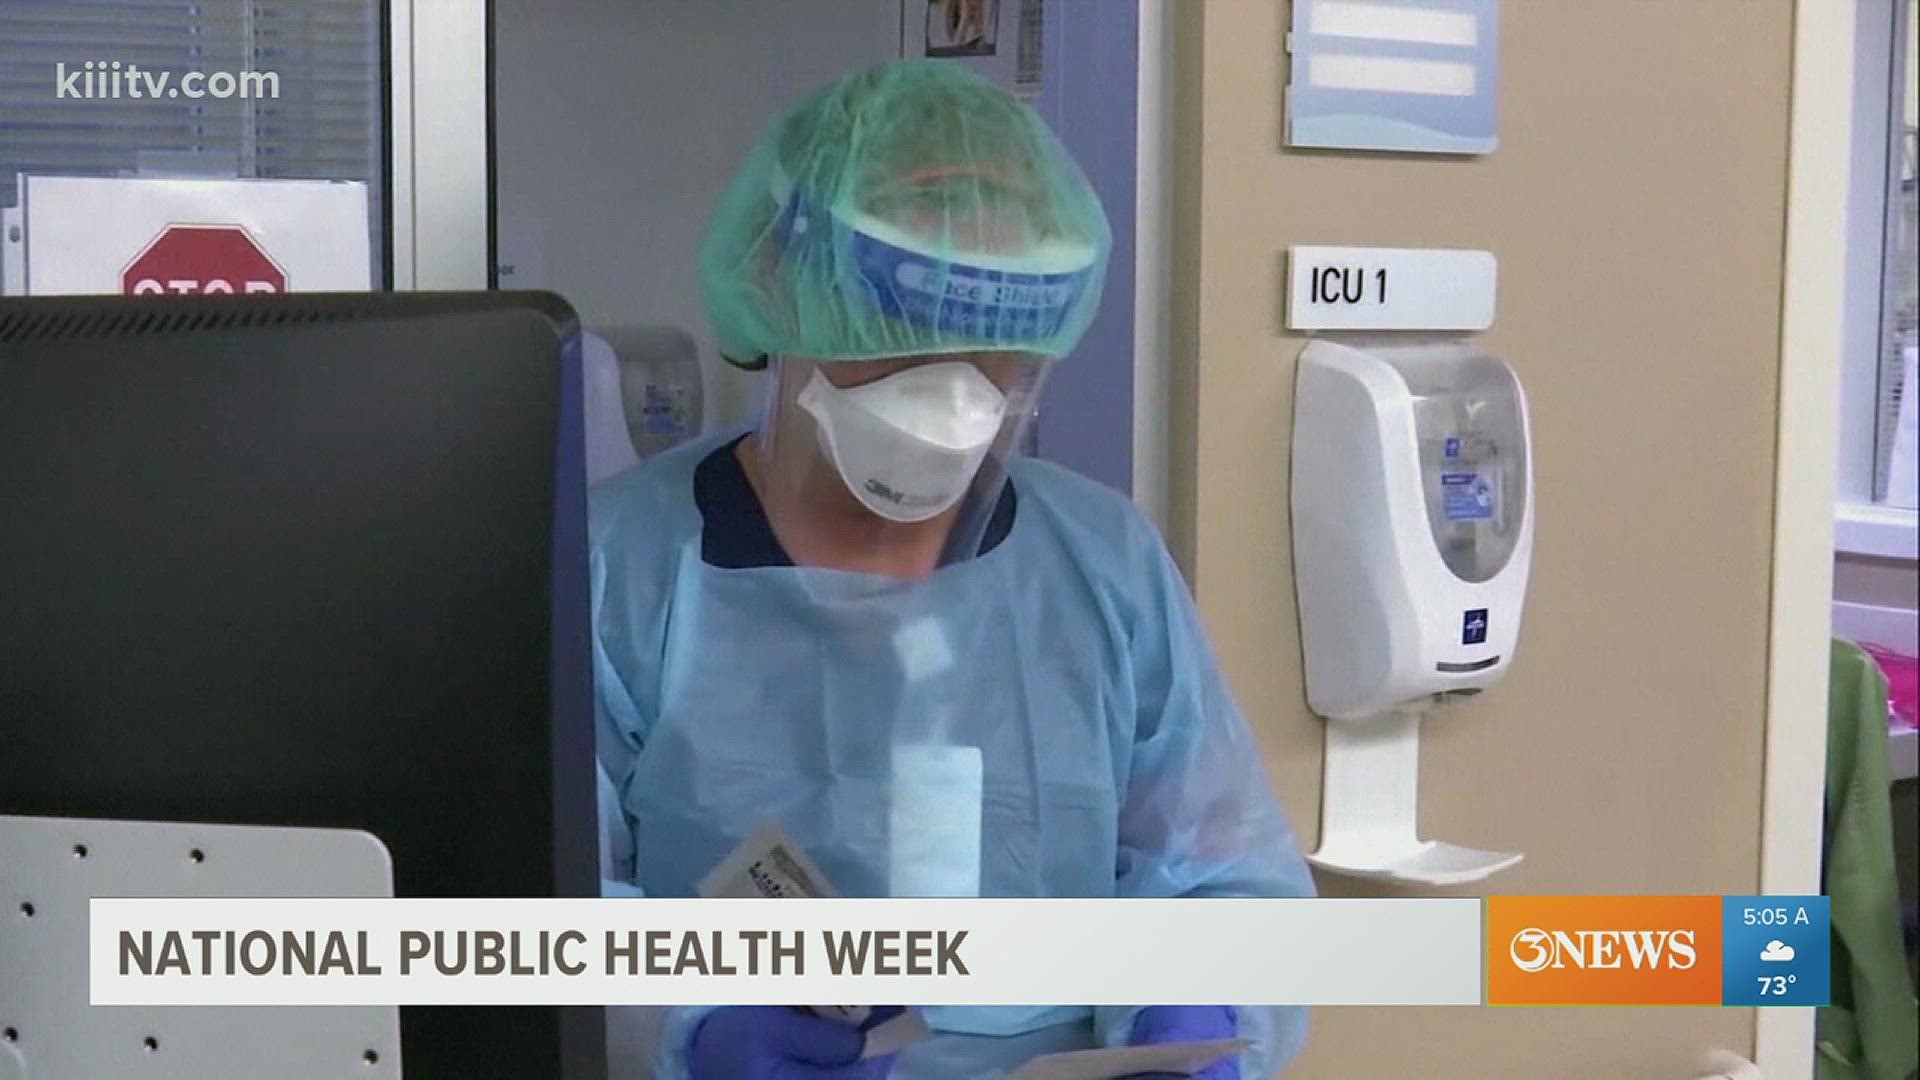 It's the start of National Public Health Week, and in the spirit of the occasion, the Health District is reopening their community Health Clinic.